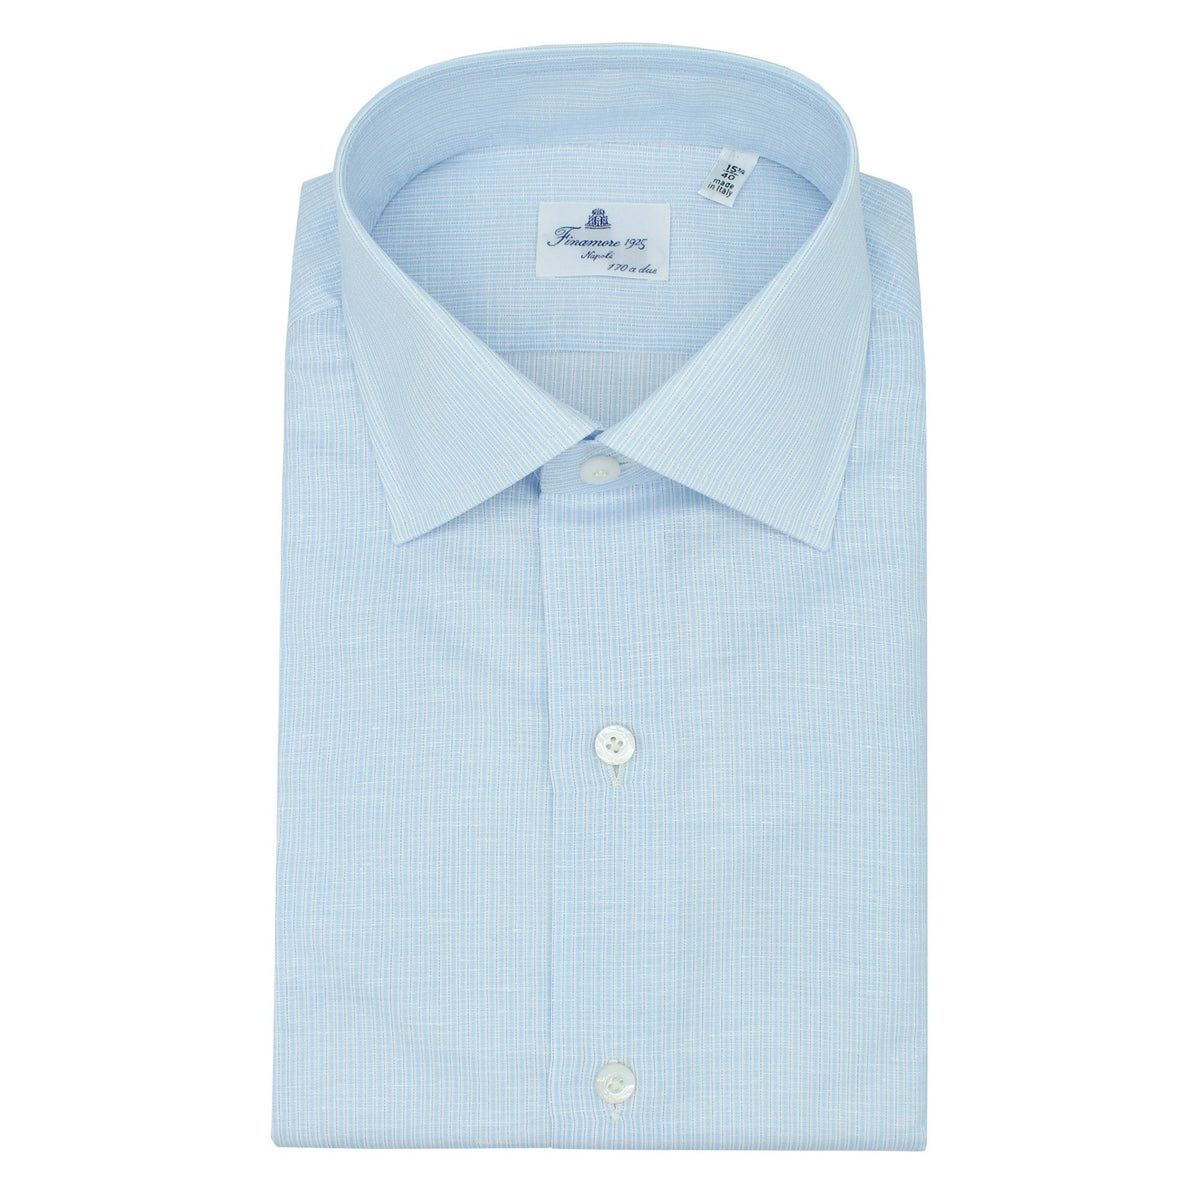 Classic Naples shirt 170 a Due in light blue striped cotton and linen